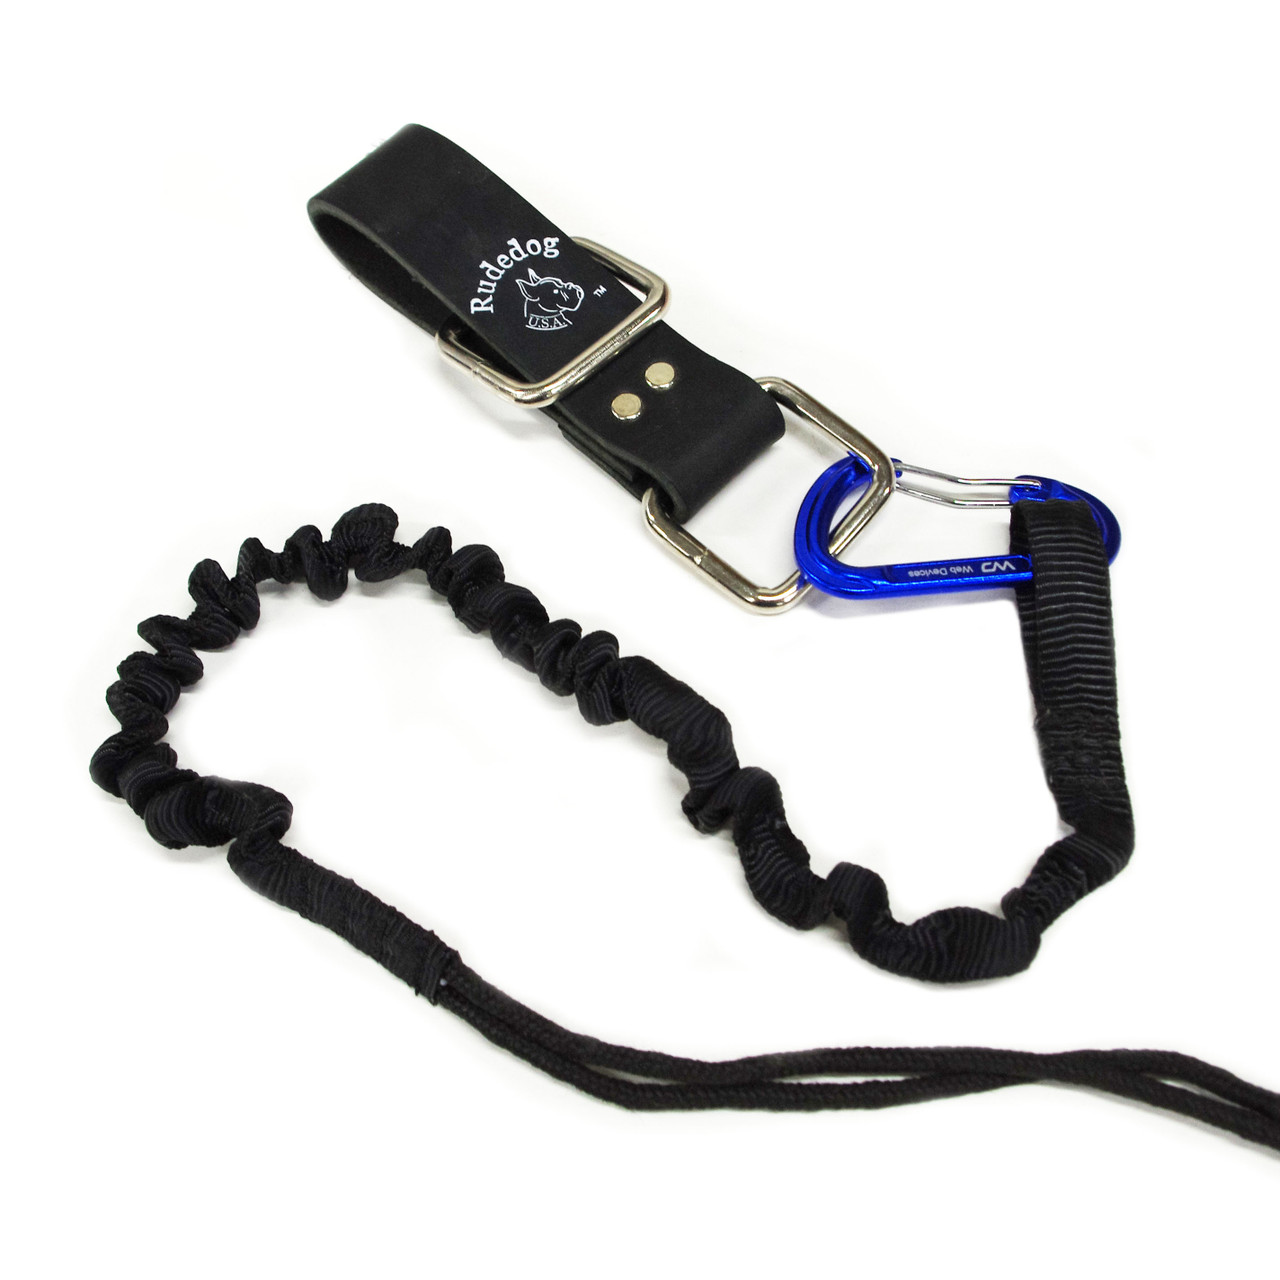 Rudedog Tool Lanyard Tether Holder from GME Supply